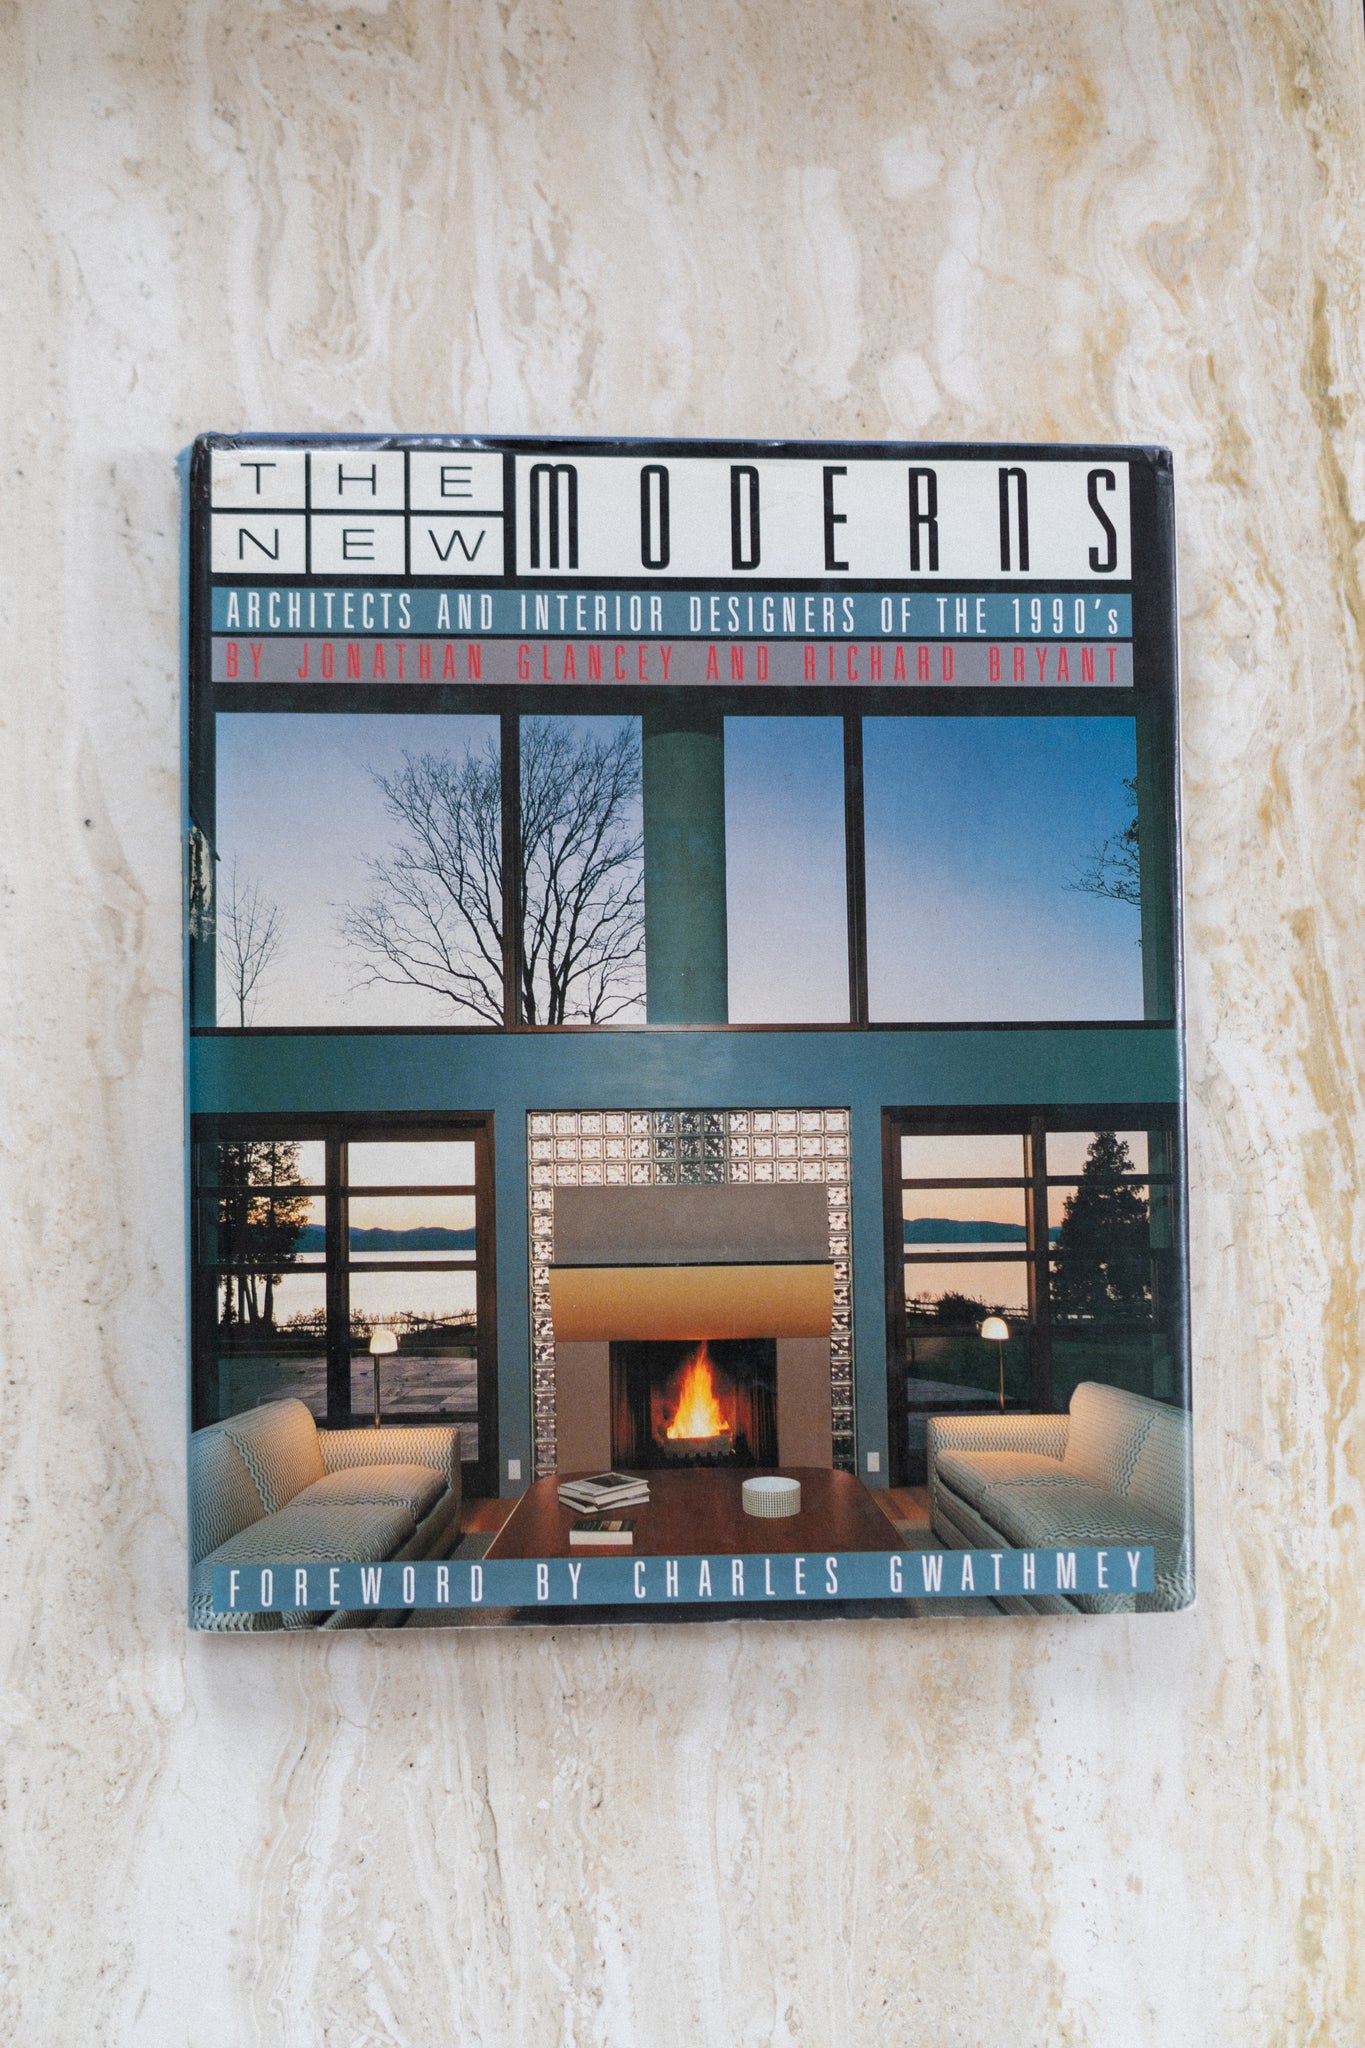 The New Moderns: Architects and Interior Designers of the 1990's (1990)